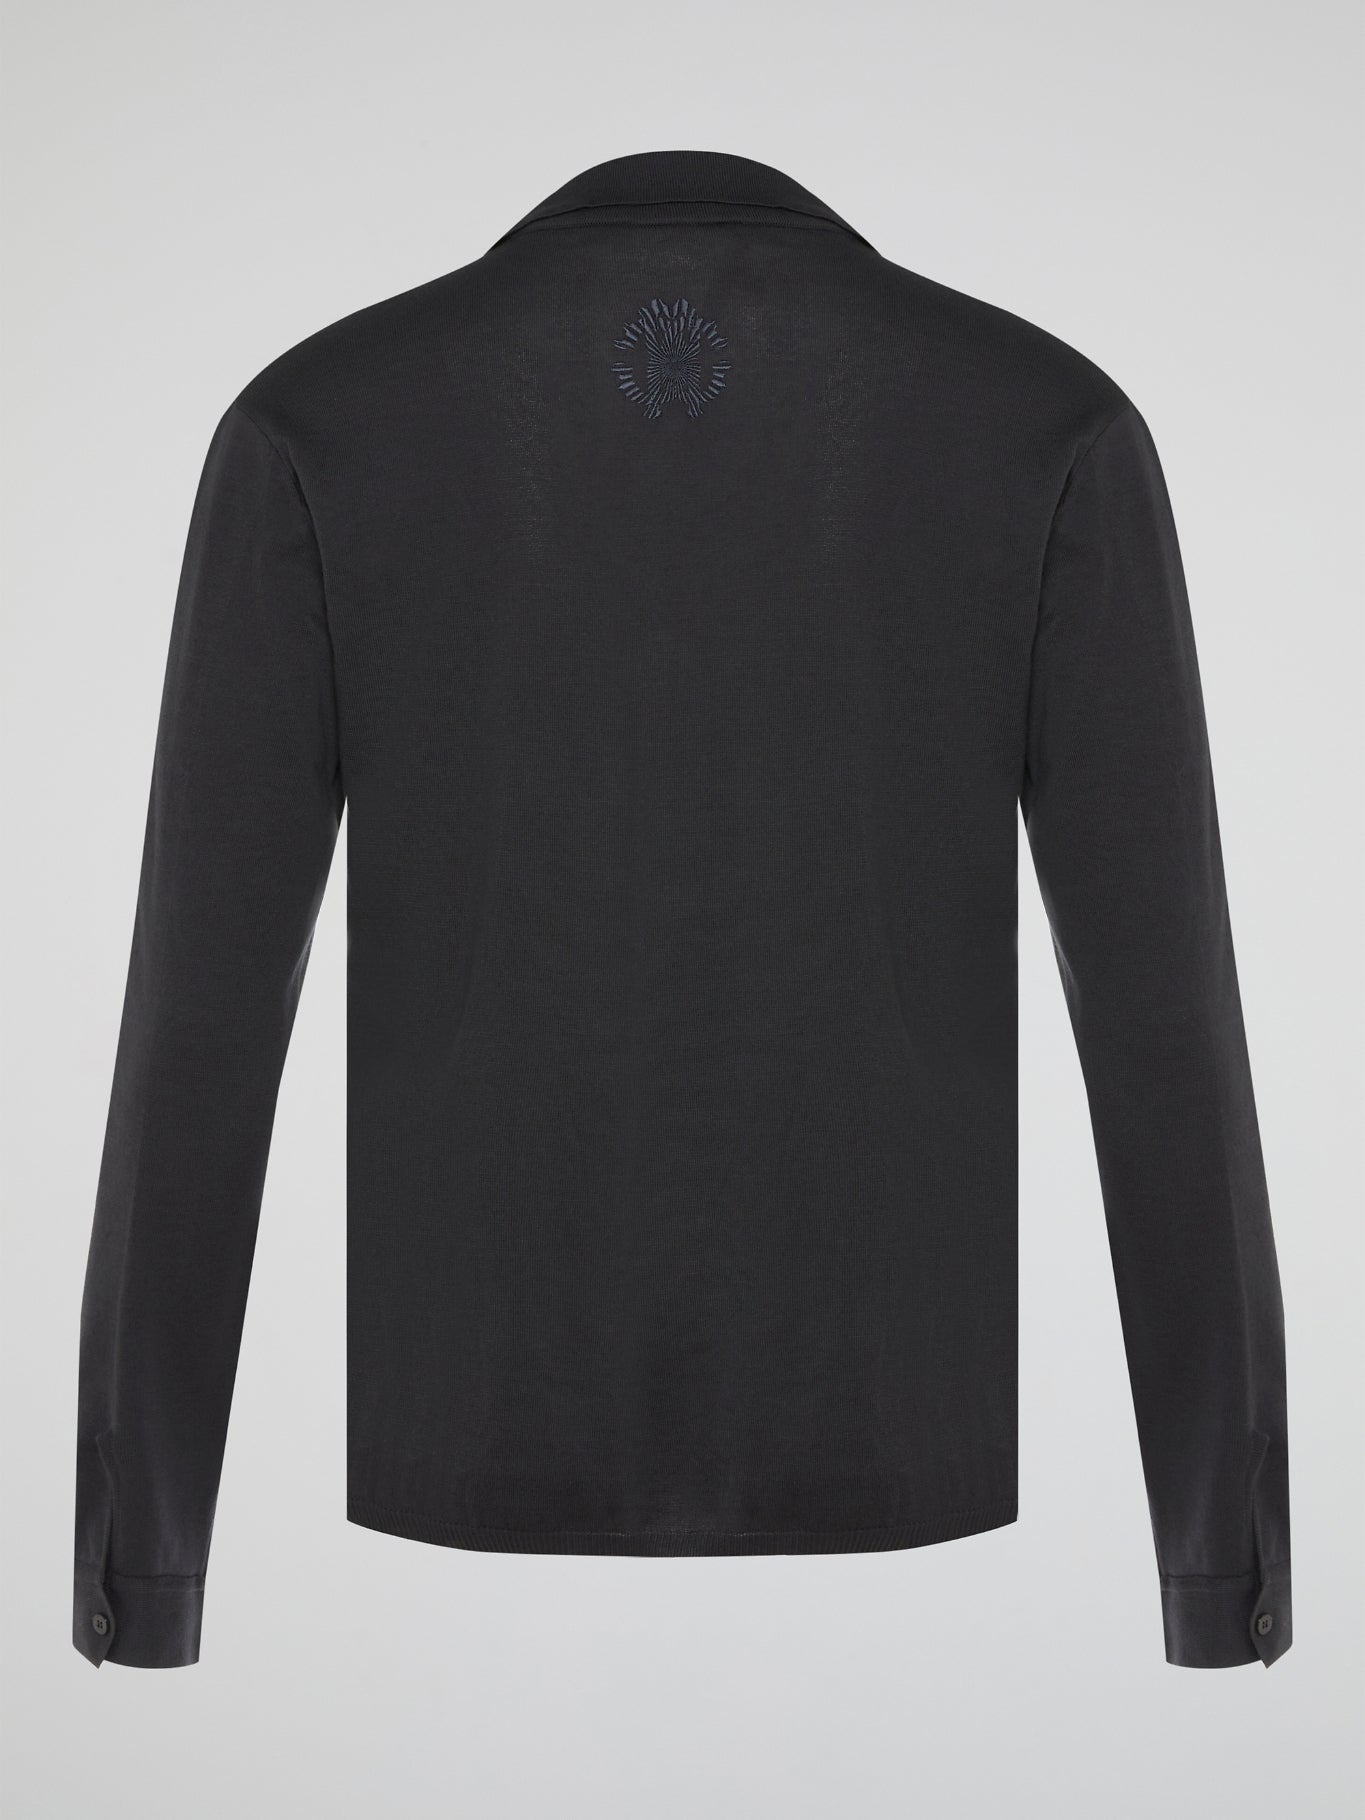 Elevate your style with the timeless elegance of our Black Long Sleeve Polo Shirt by Roberto Cavalli. Crafted with meticulous attention to detail, this wardrobe staple features a luxurious blend of comfort and sophistication. Whether you're headed to a casual brunch or a formal event, this Polo Shirt will effortlessly take you from day to night with its sleek design and iconic Cavalli logo.